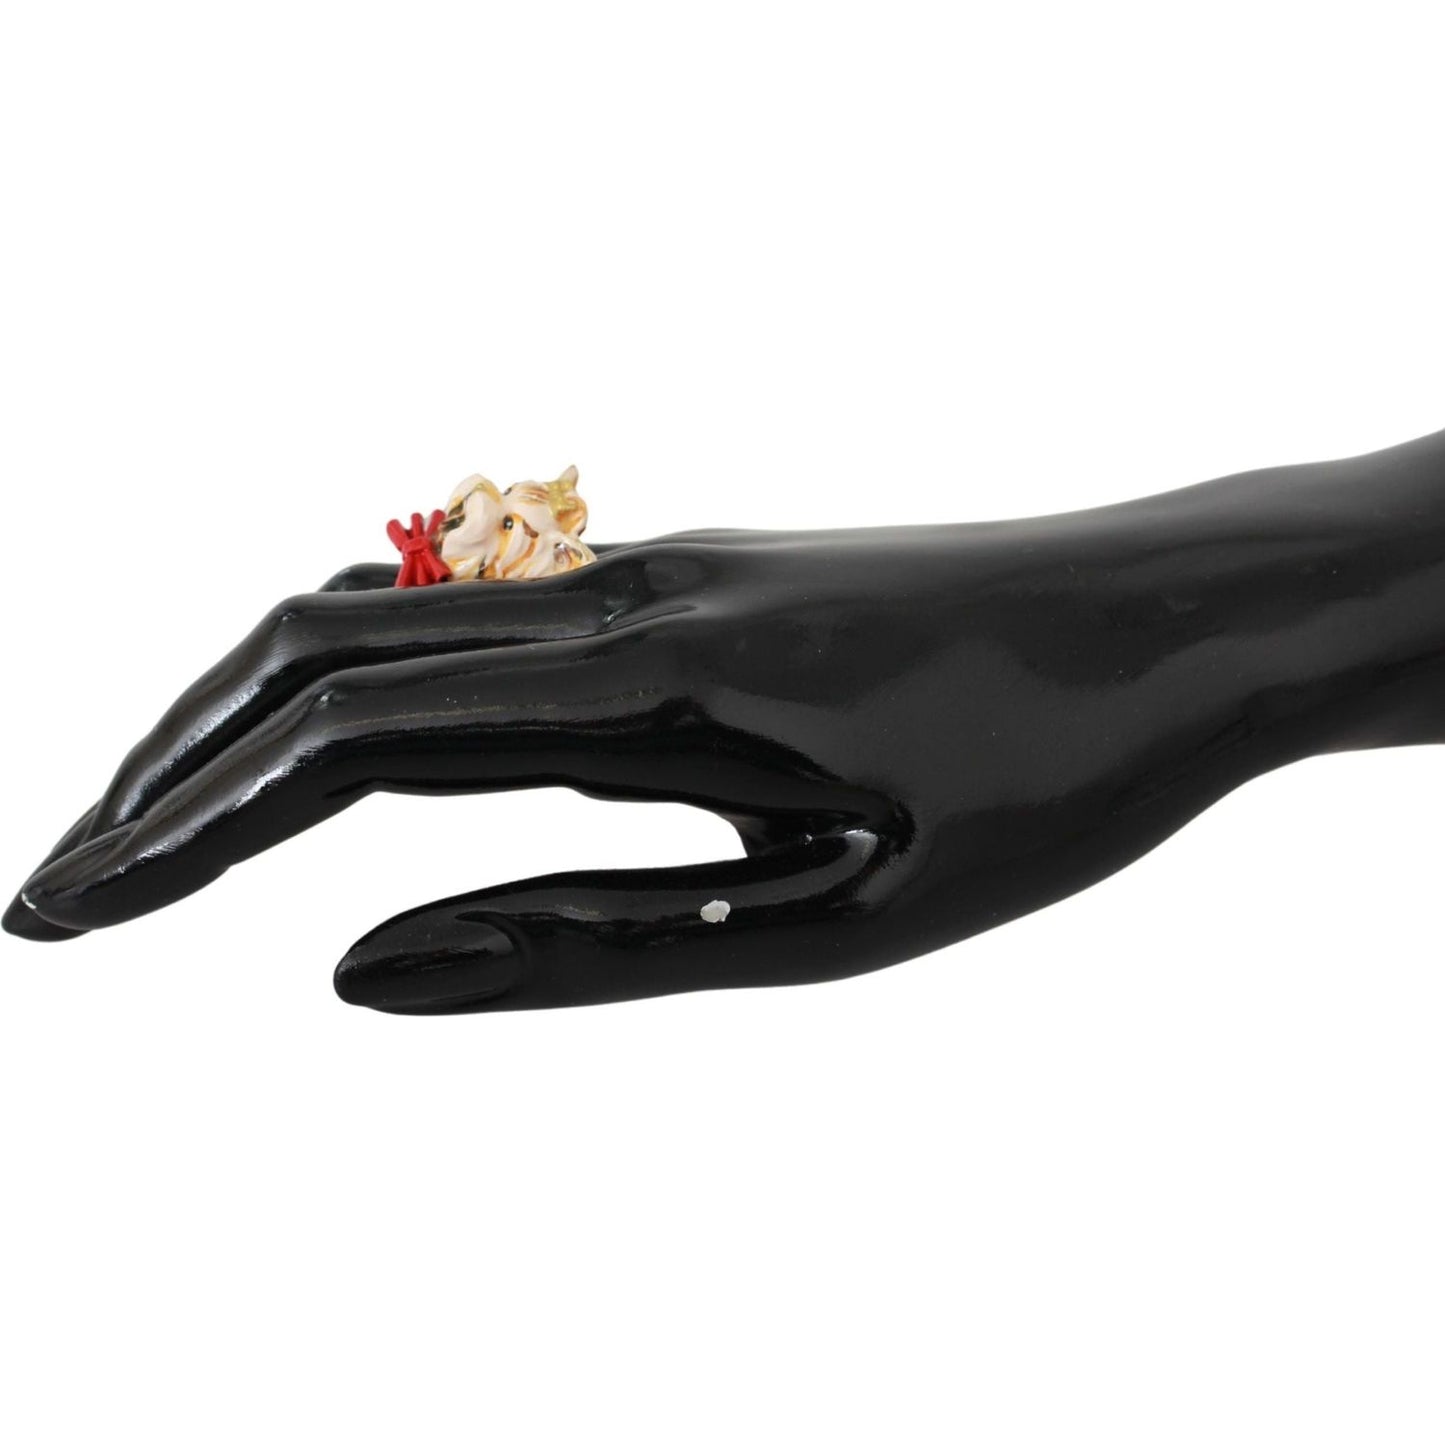 Dolce & Gabbana Chic Canine Gold-Tone Statement Ring gold-brass-resin-beige-dog-pet-branded-accessory-ring IMG_6499-scaled-e9691a3d-179.jpg